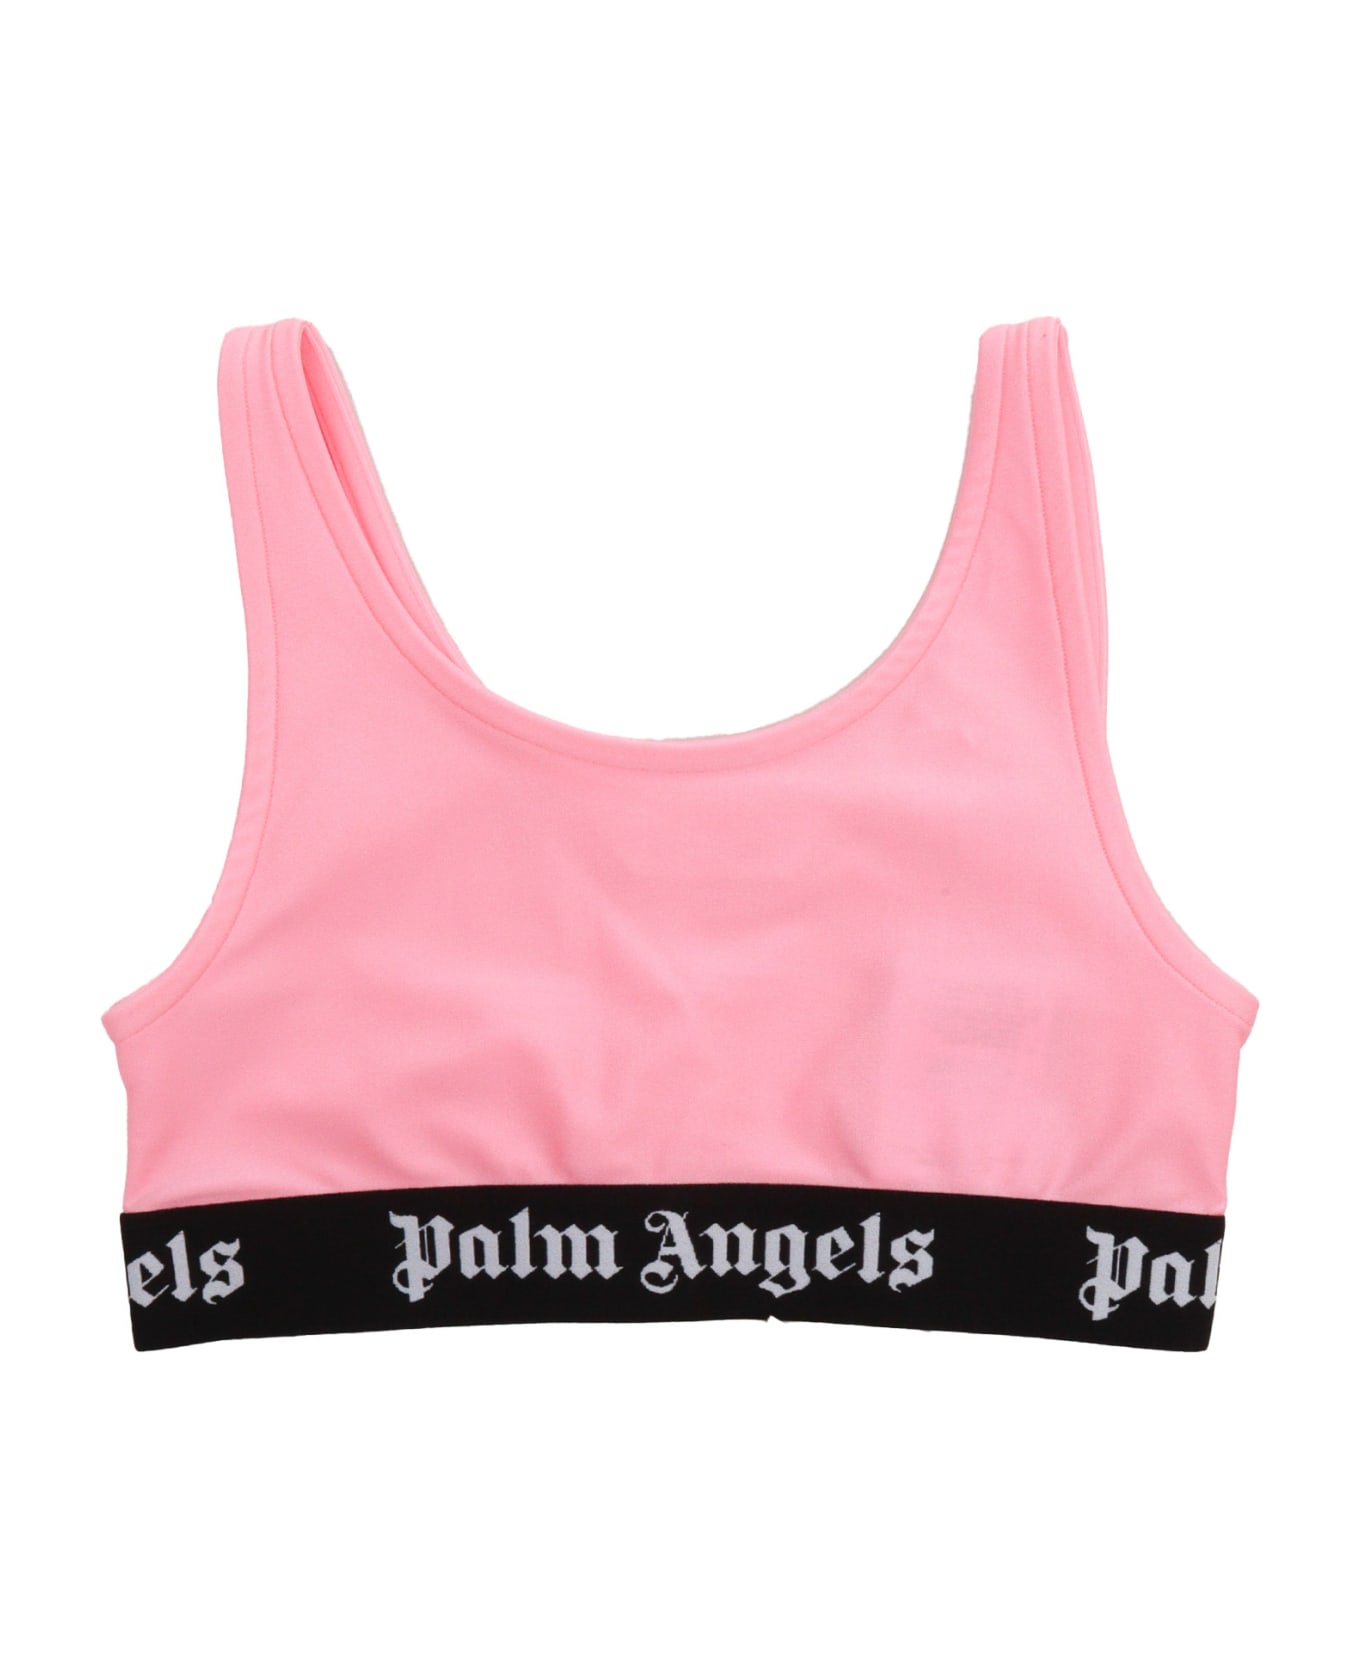 Palm Angels Pink Sports Top - PINK